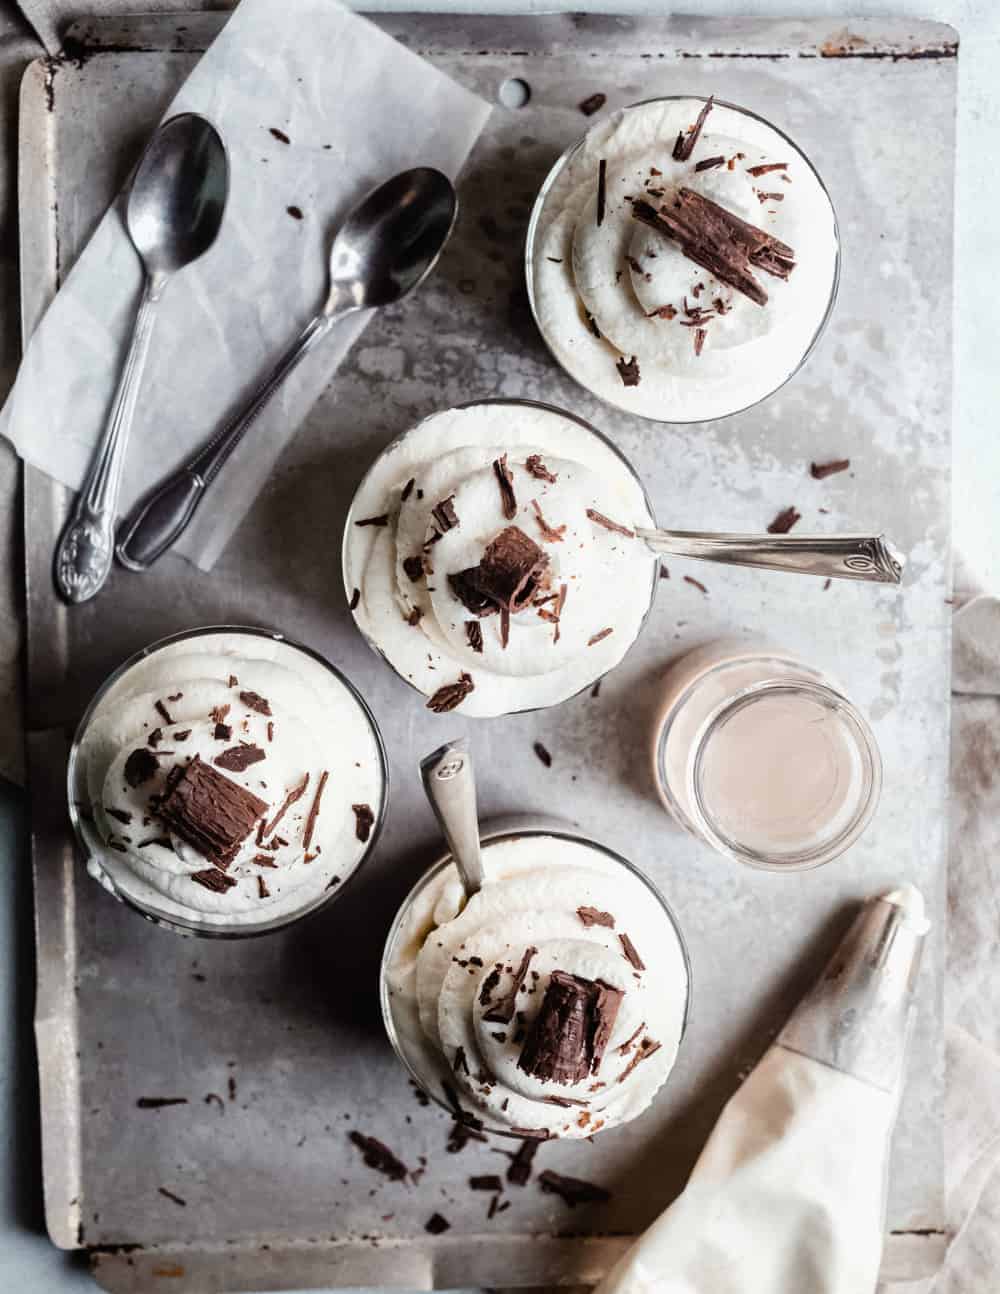 Homemade chocolate pudding in small glass dishes, topped with whipped cream and chocolate shavings